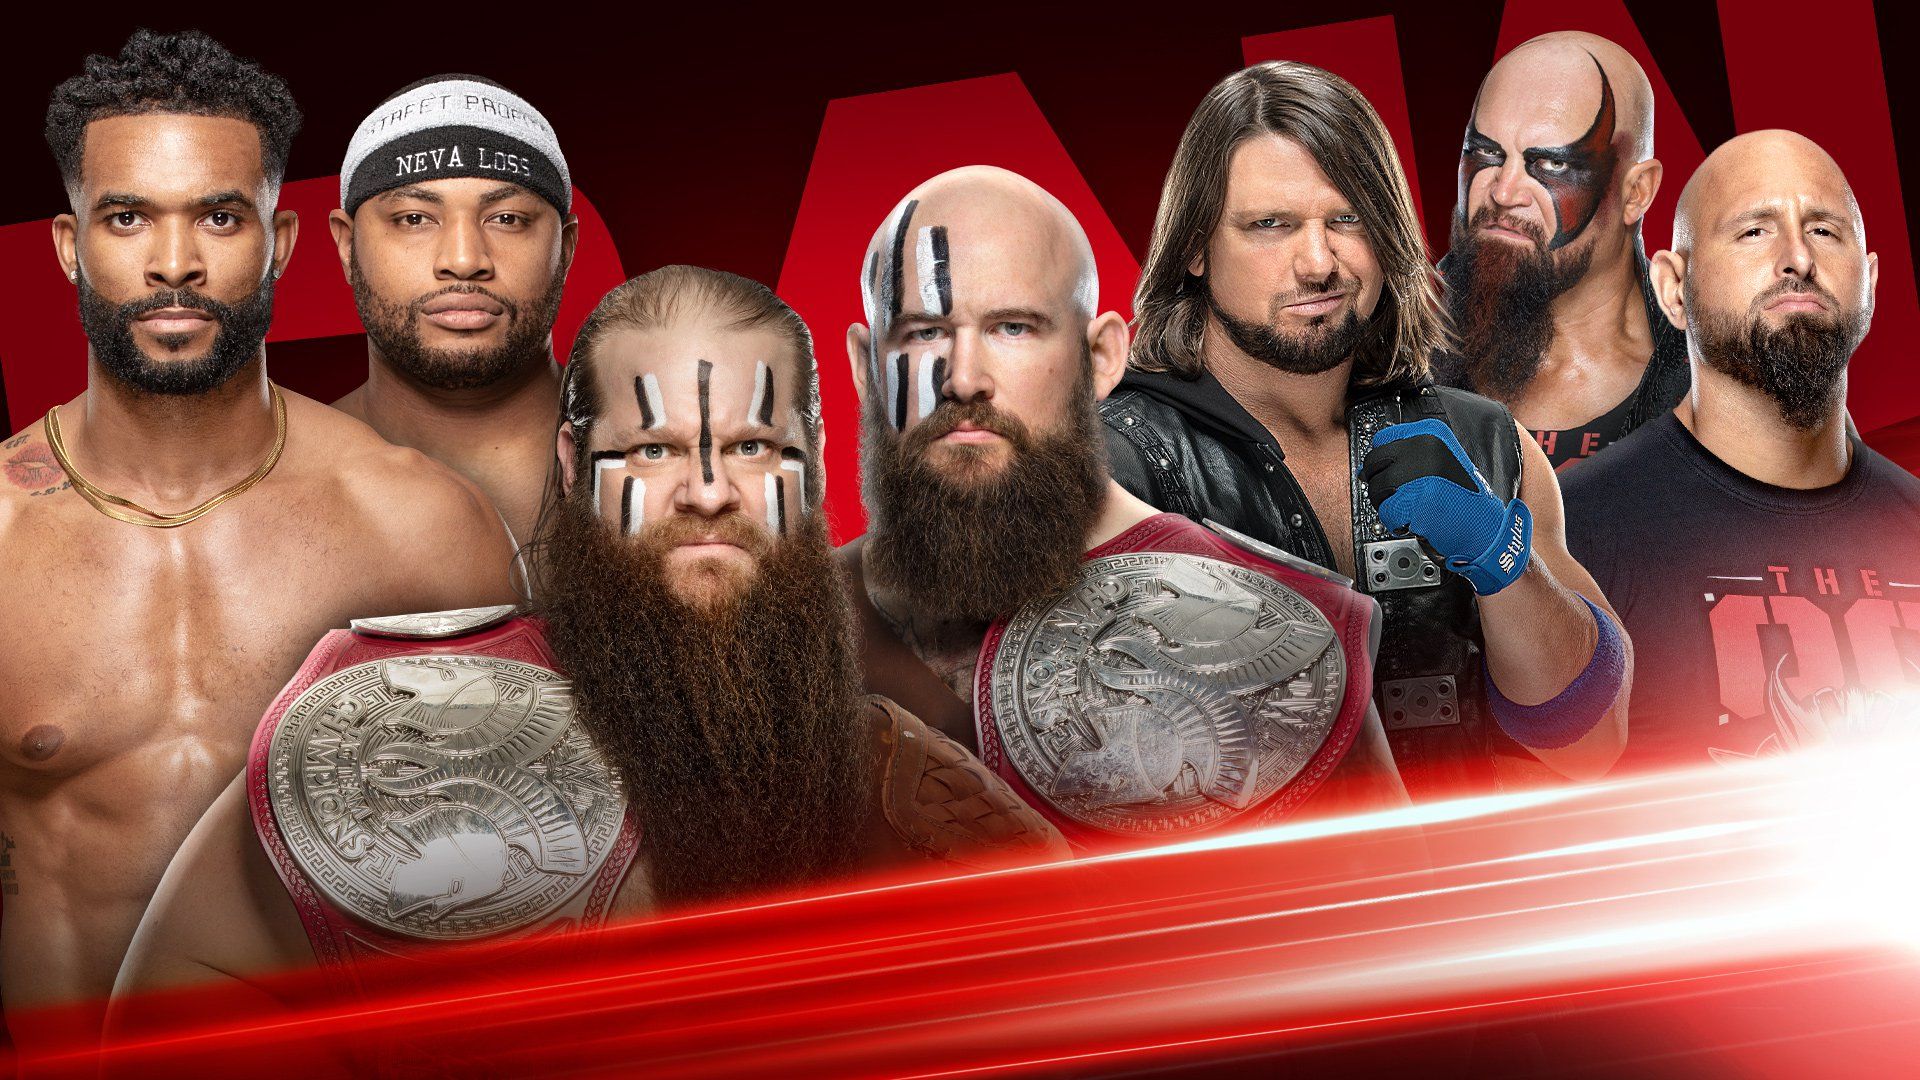 WWE MONDAY NIGHT RAW Highlights For January 2020: United States & Raw Tag Team Title Matches And More